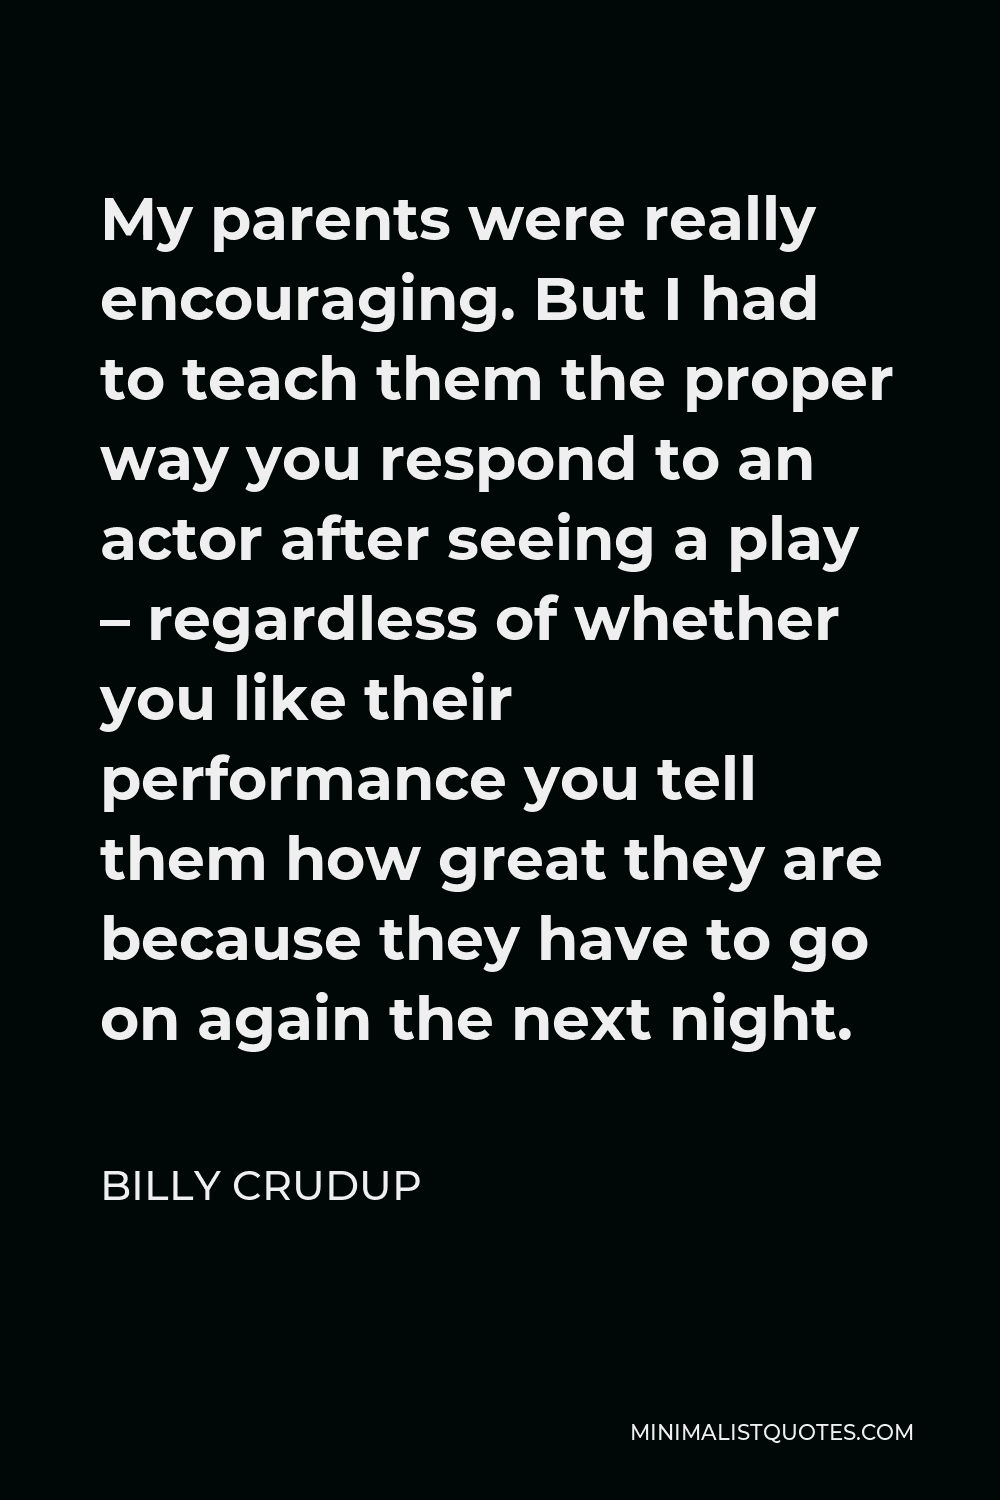 Billy Crudup Quote - My parents were really encouraging. But I had to teach them the proper way you respond to an actor after seeing a play – regardless of whether you like their performance you tell them how great they are because they have to go on again the next night.